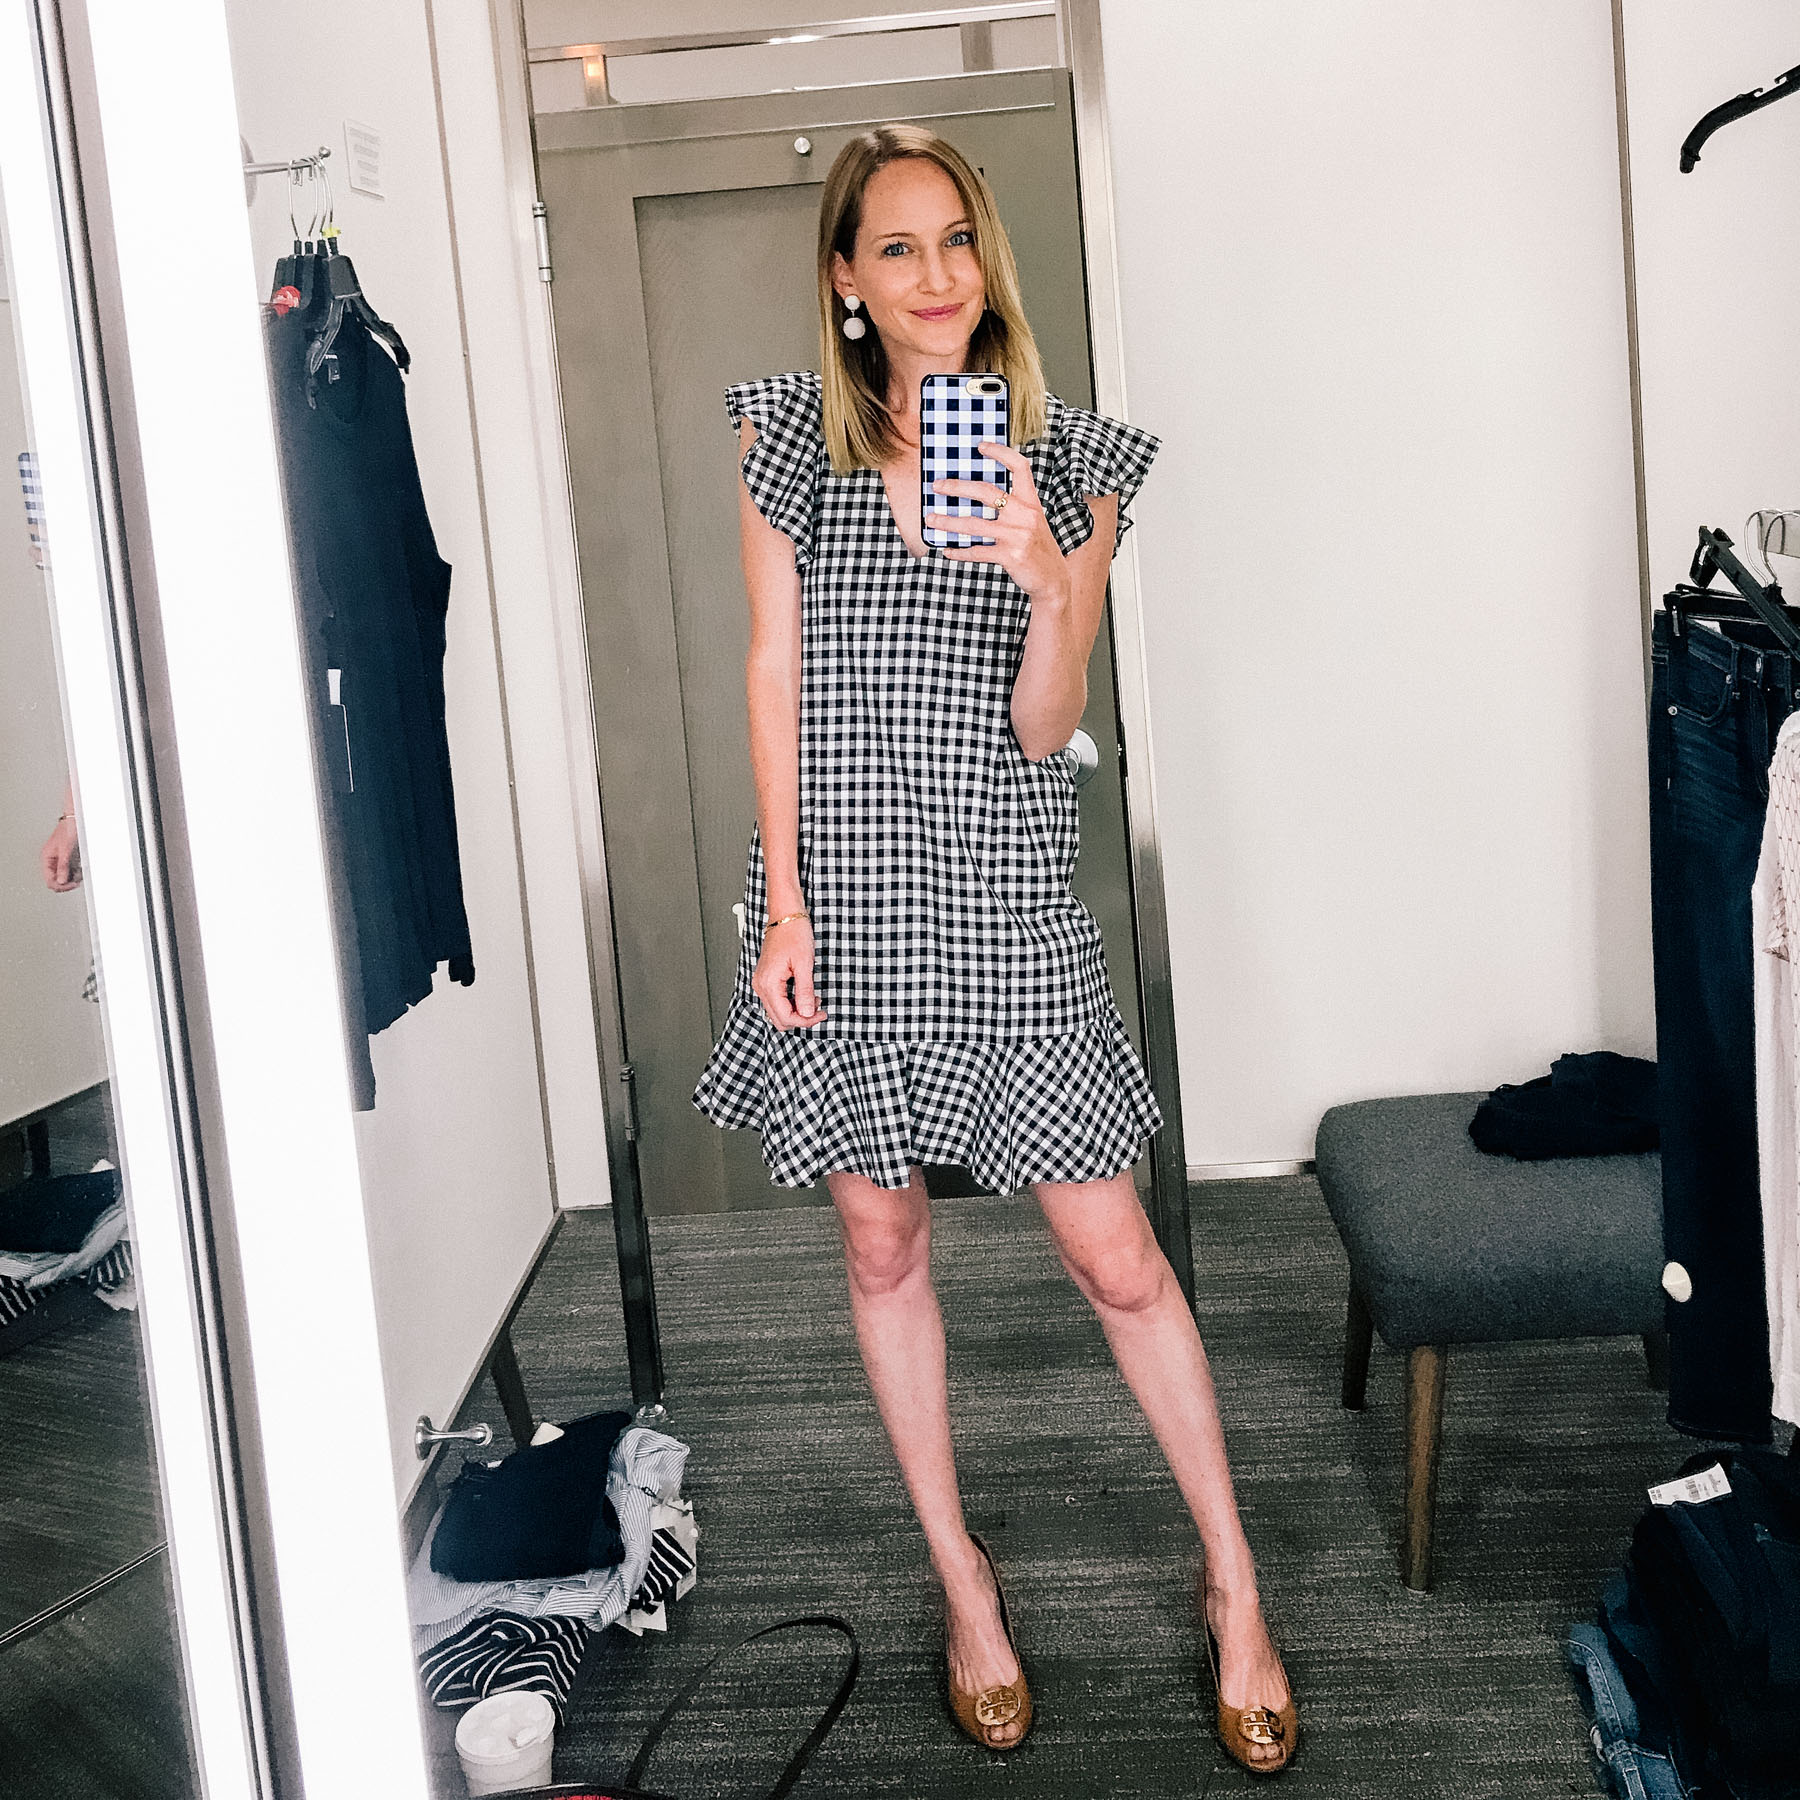 Navy Gingham Dress / Sale Version of the Tory Burch Pumps (And here are the flats!) / Tuckernuck Earrings / Gingham Phone Case